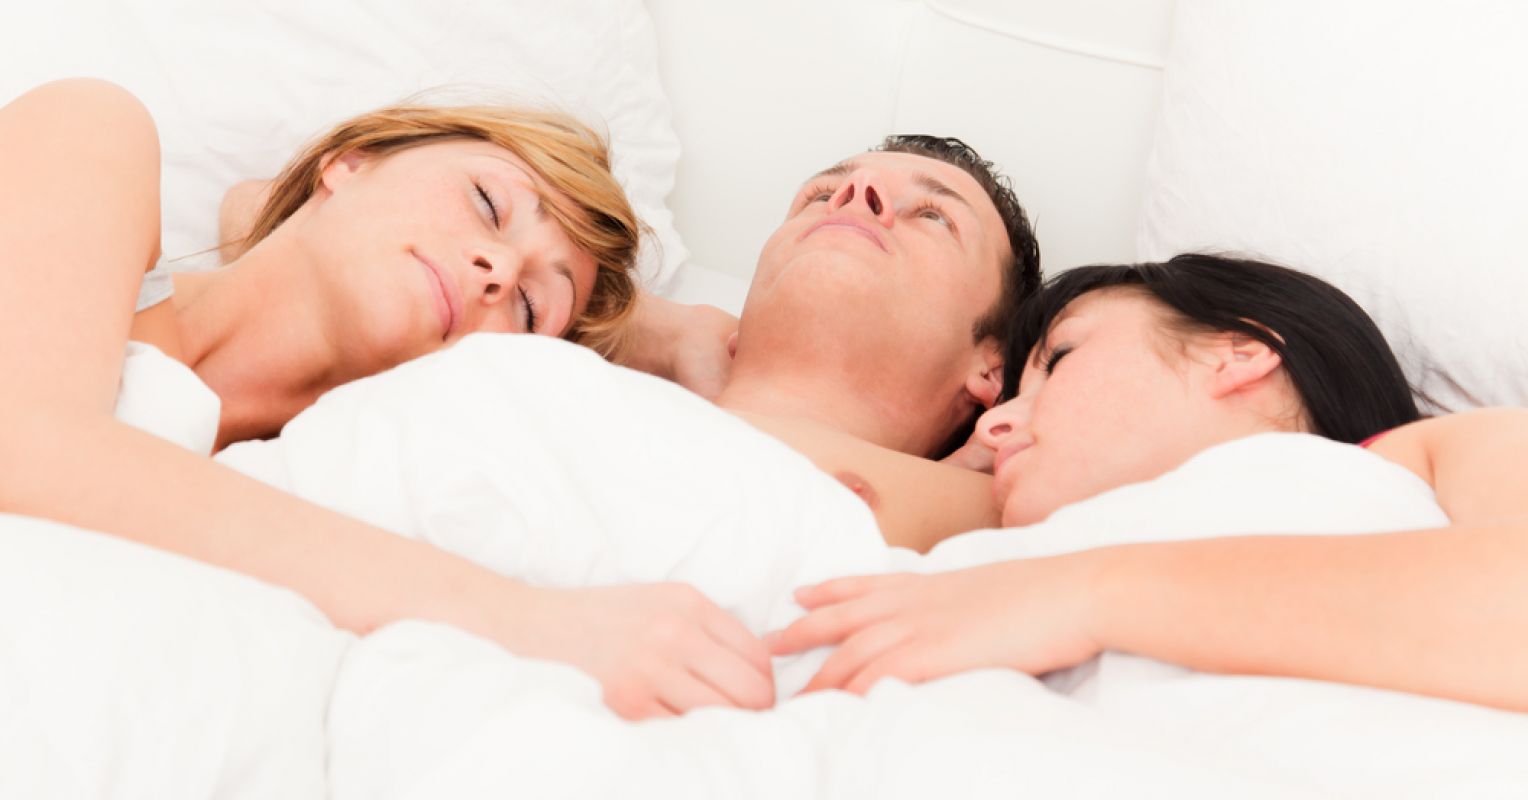 How Many People Have Ever Actually Had a Threesome? Psychology Today pic